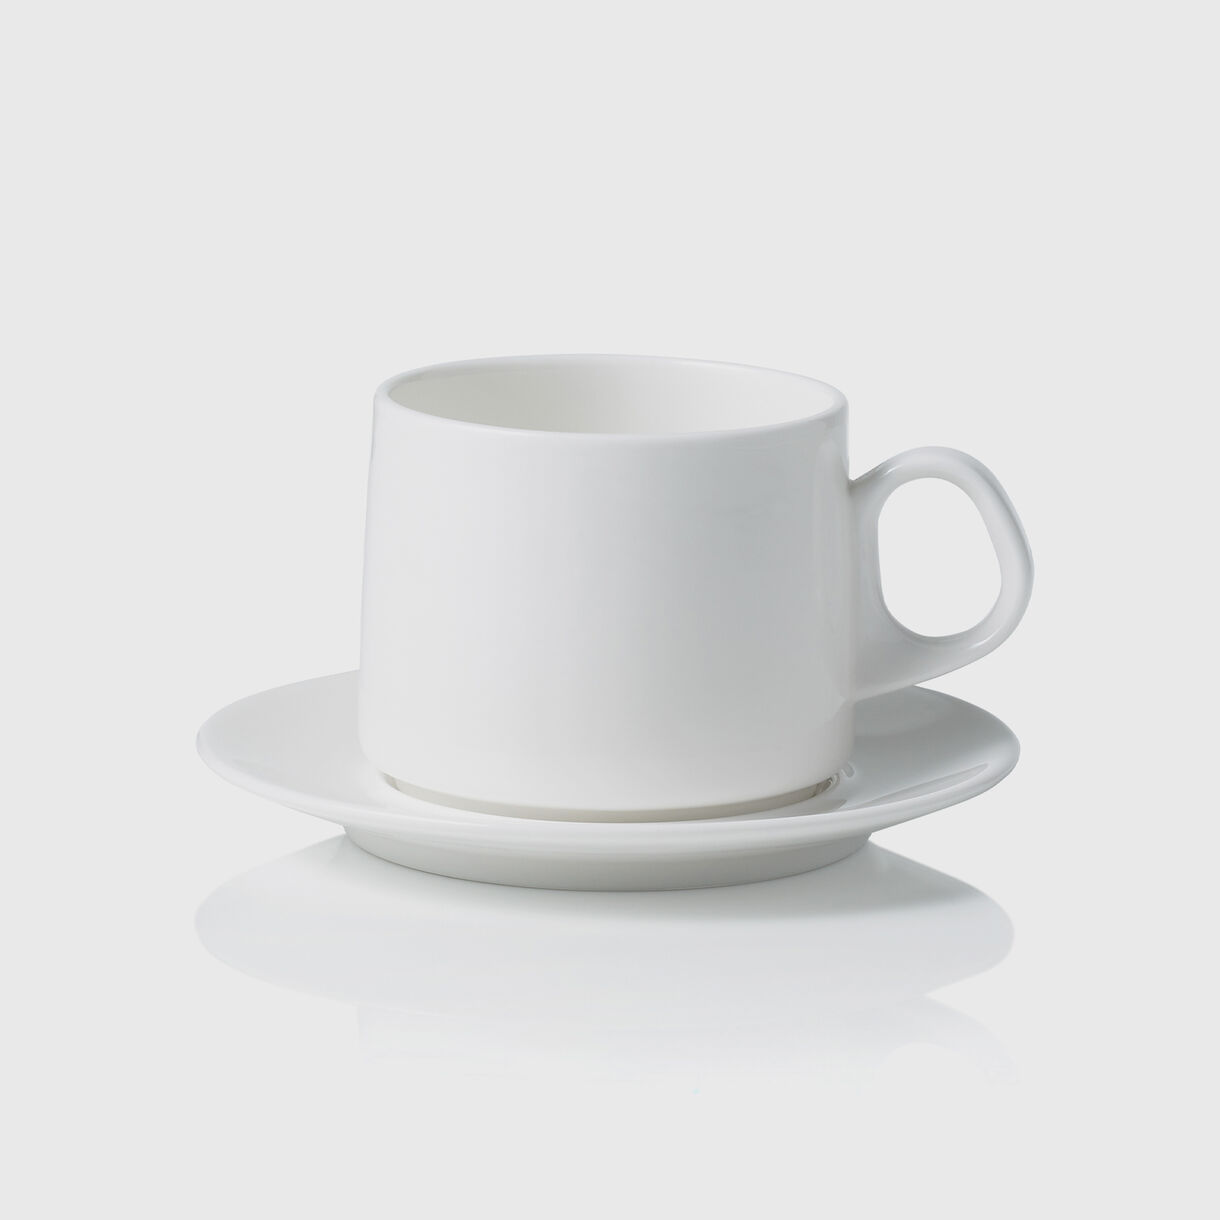 David Caon by Noritake Cup and Saucer